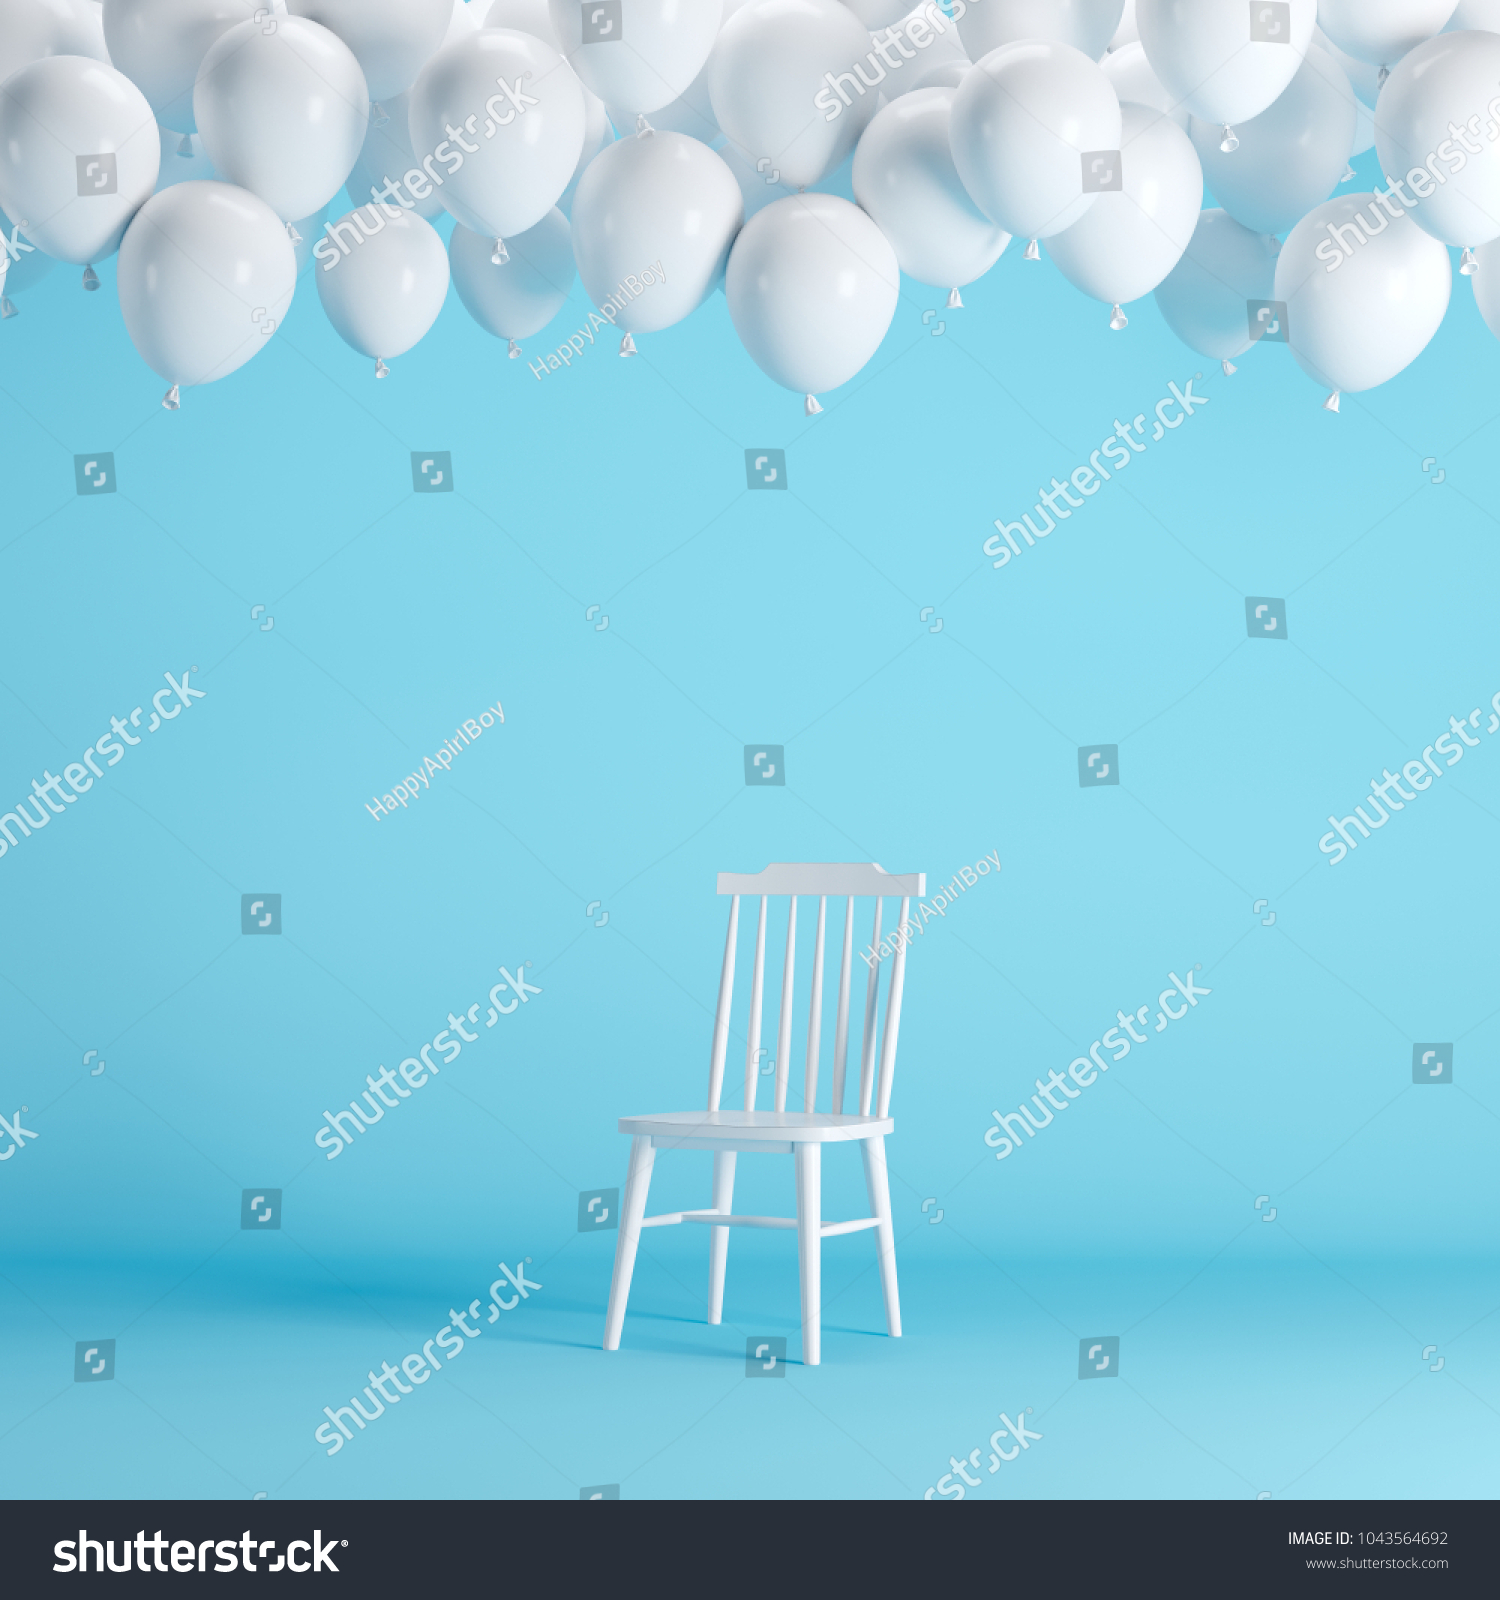 White chair with floating white balloons in blue background room studio. minimal idea creative concept. #1043564692